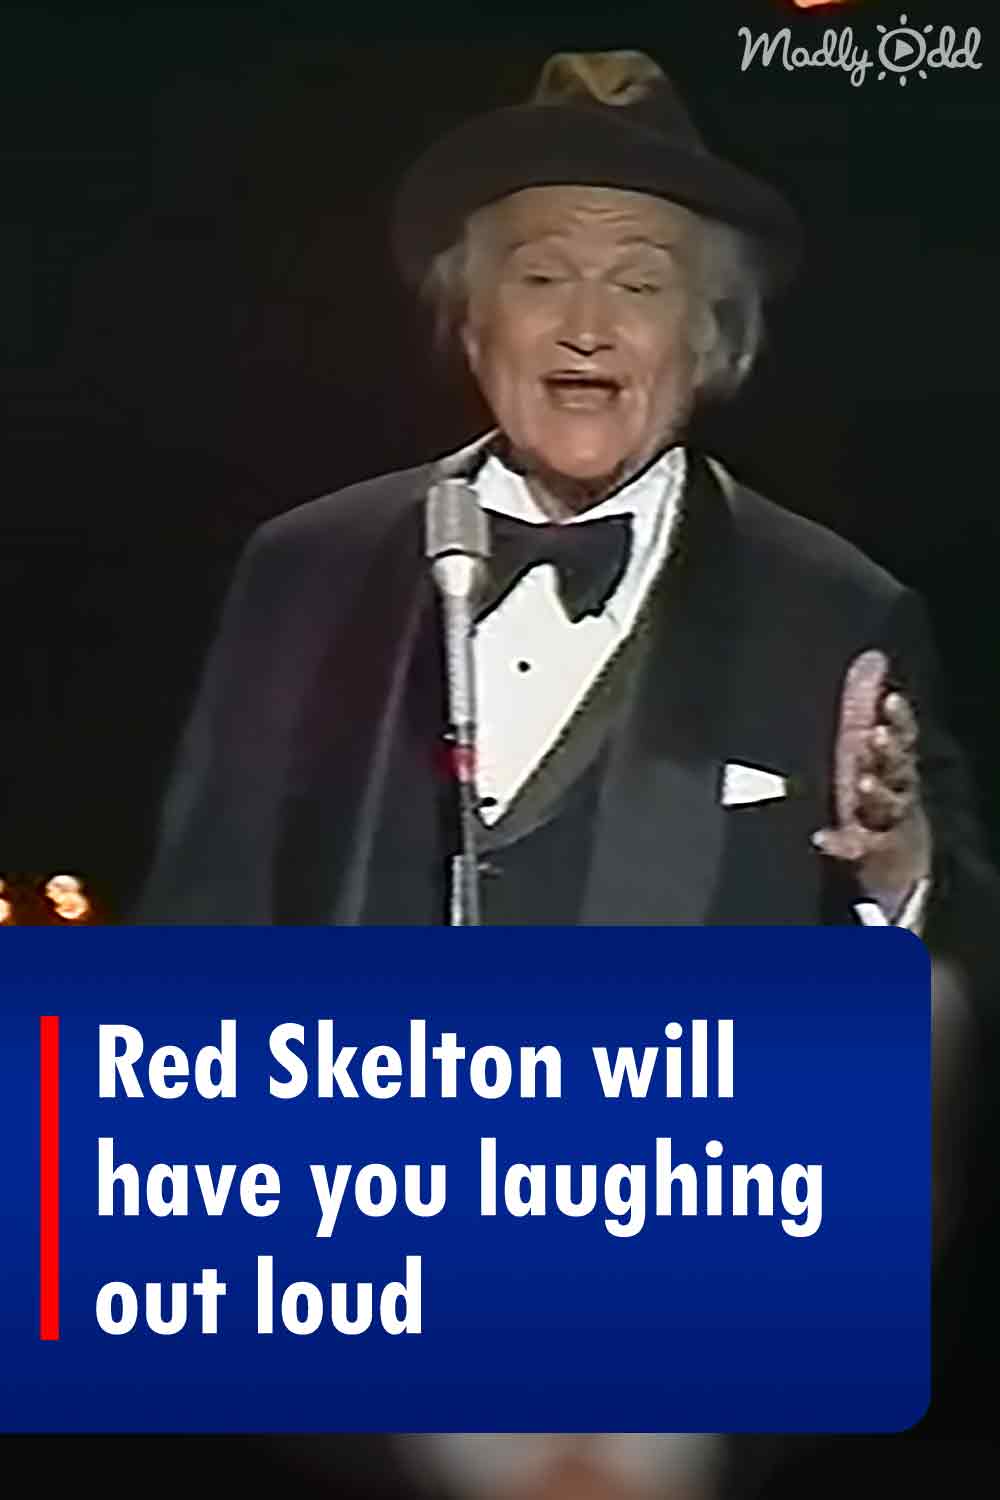 Red Skelton will have you laughing out loud